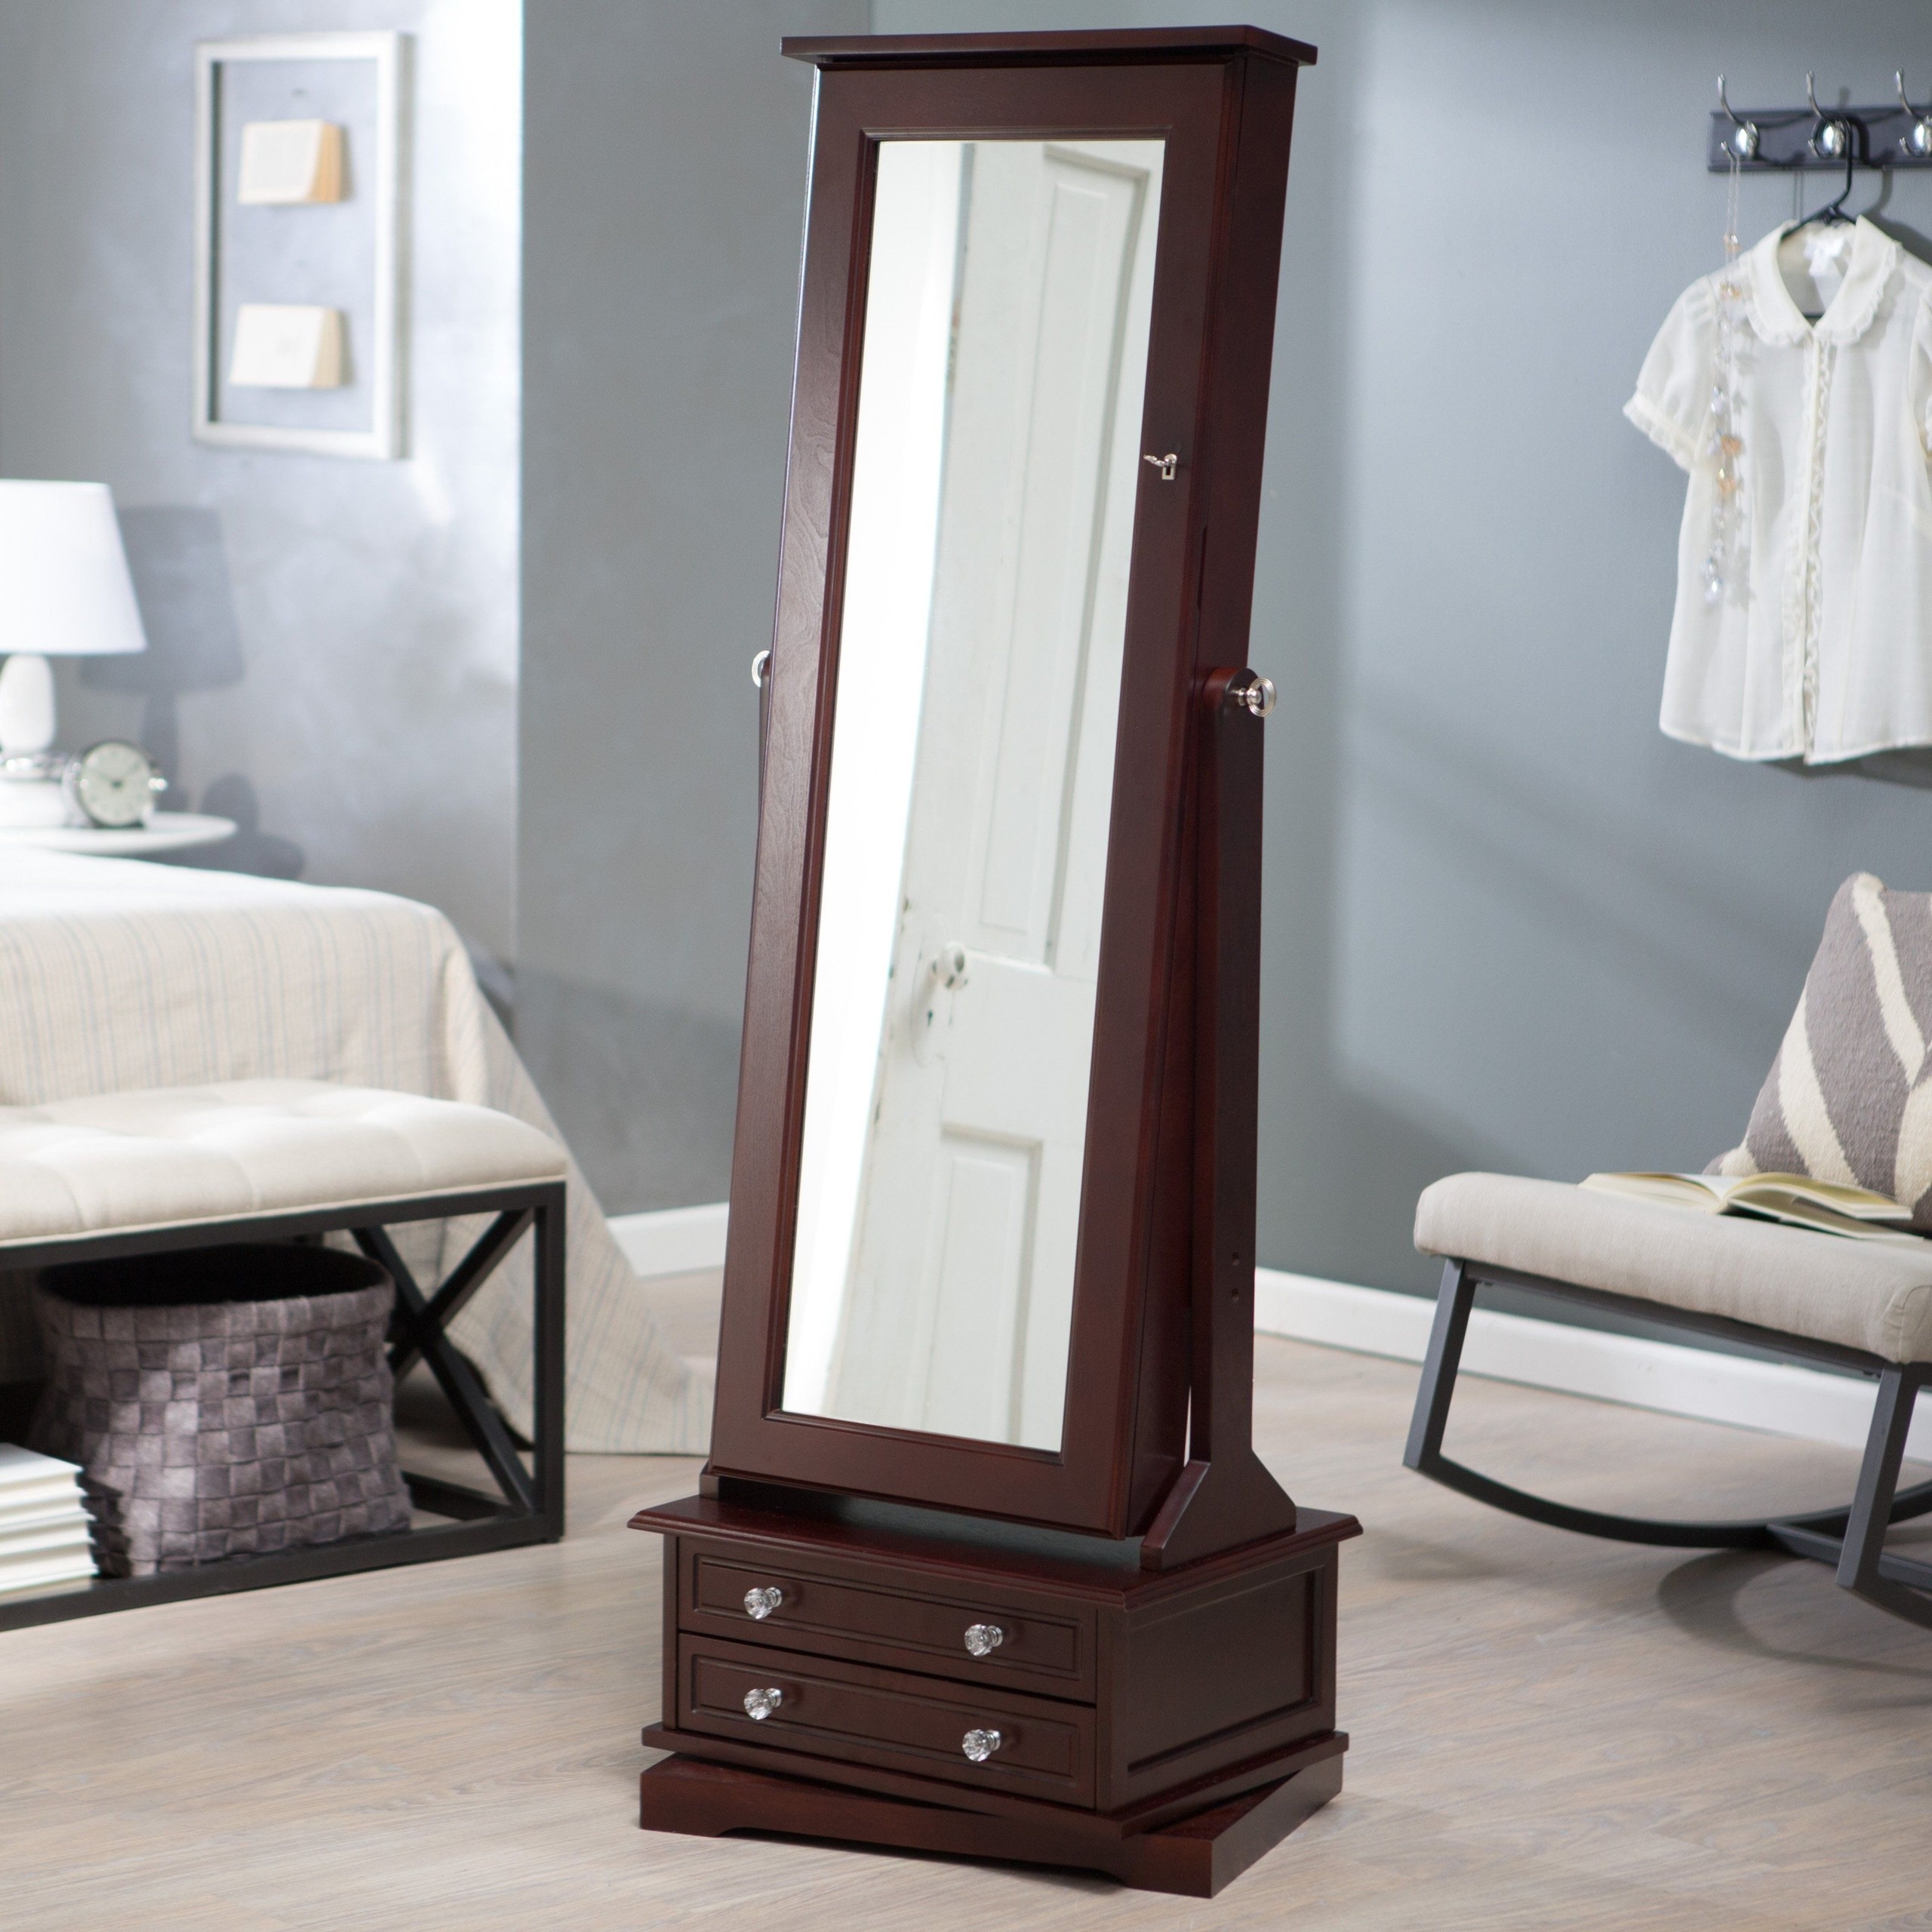 Floor Standing Mirror Jewelry Armoire - Ideas on Foter